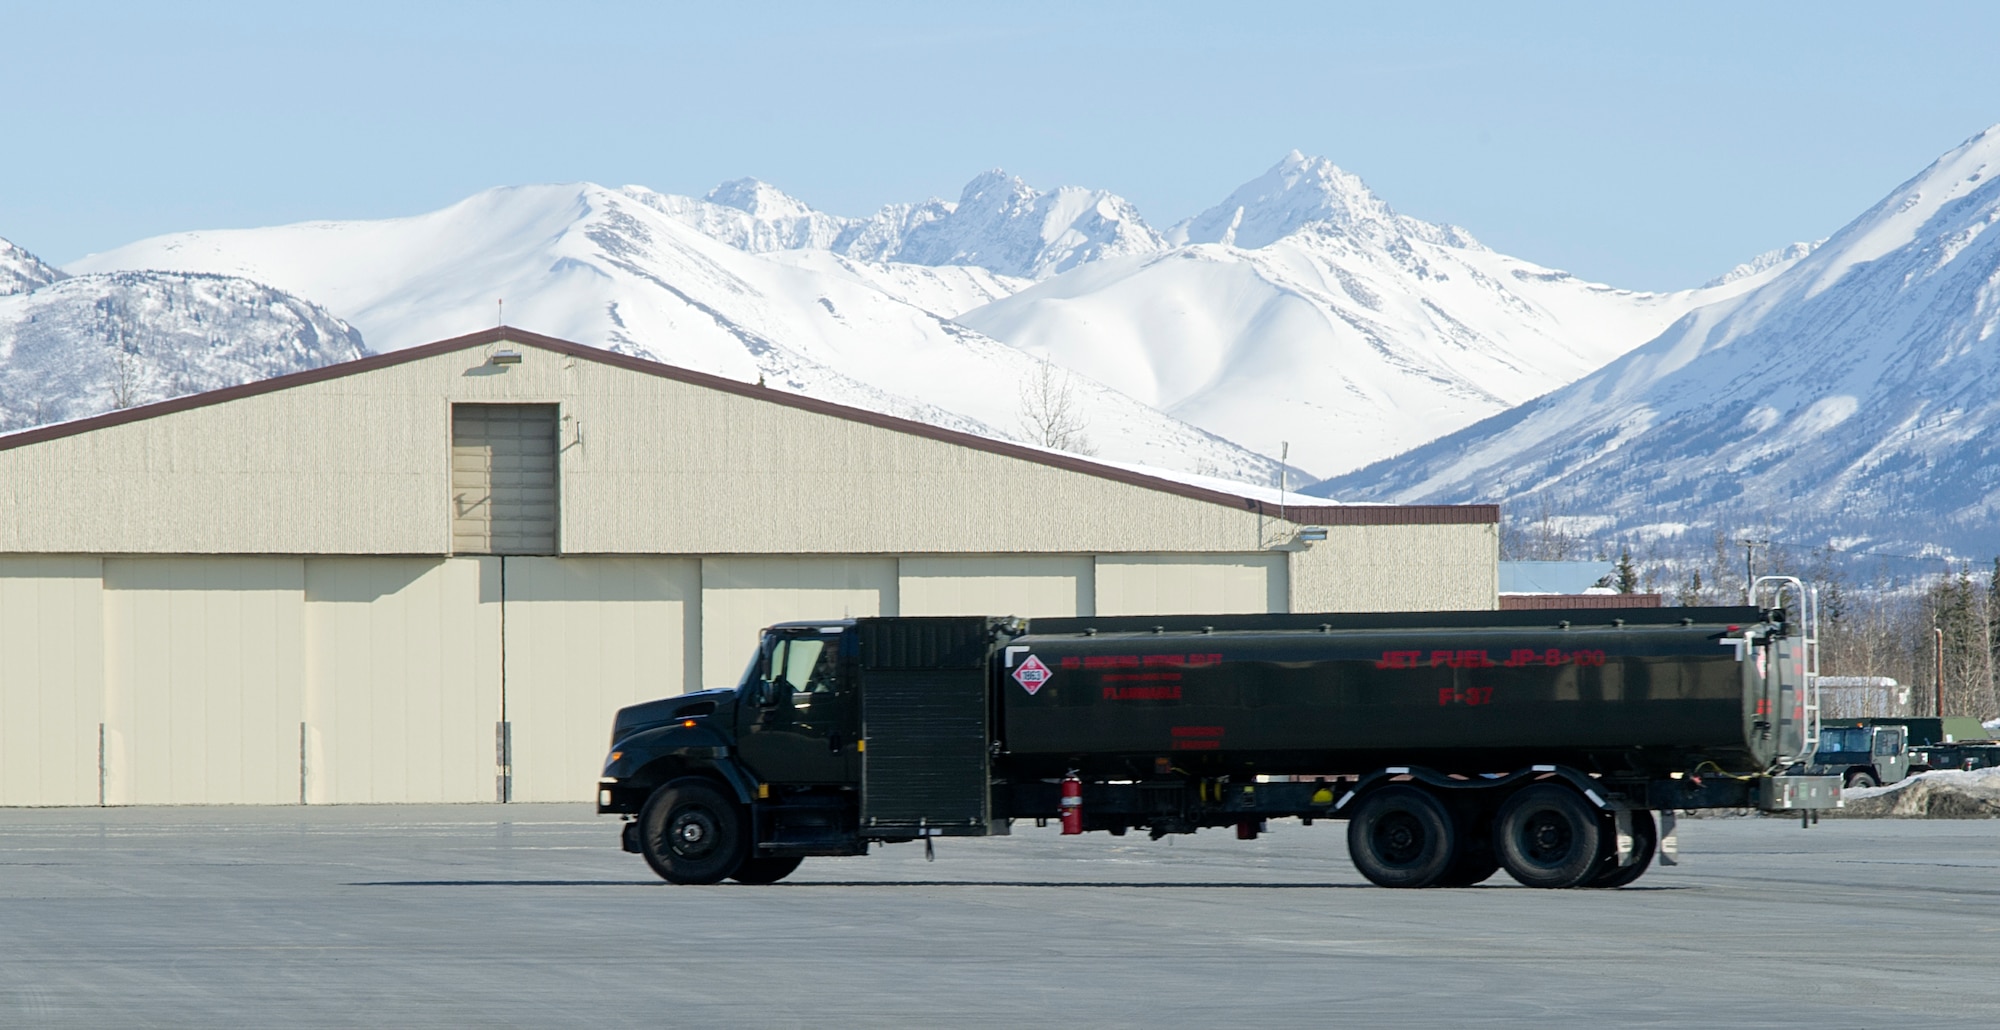 A R-11 fuel truck drives away after refueling an F-22 Raptor fighter on Joint Base Elmendorf-Richardson April 3, 2012. The R-11 fuel trucks can hold up to 6,000 gallons of fuel. (U.S. Air Force photo/Staff Sgt. Zachary Wolf)